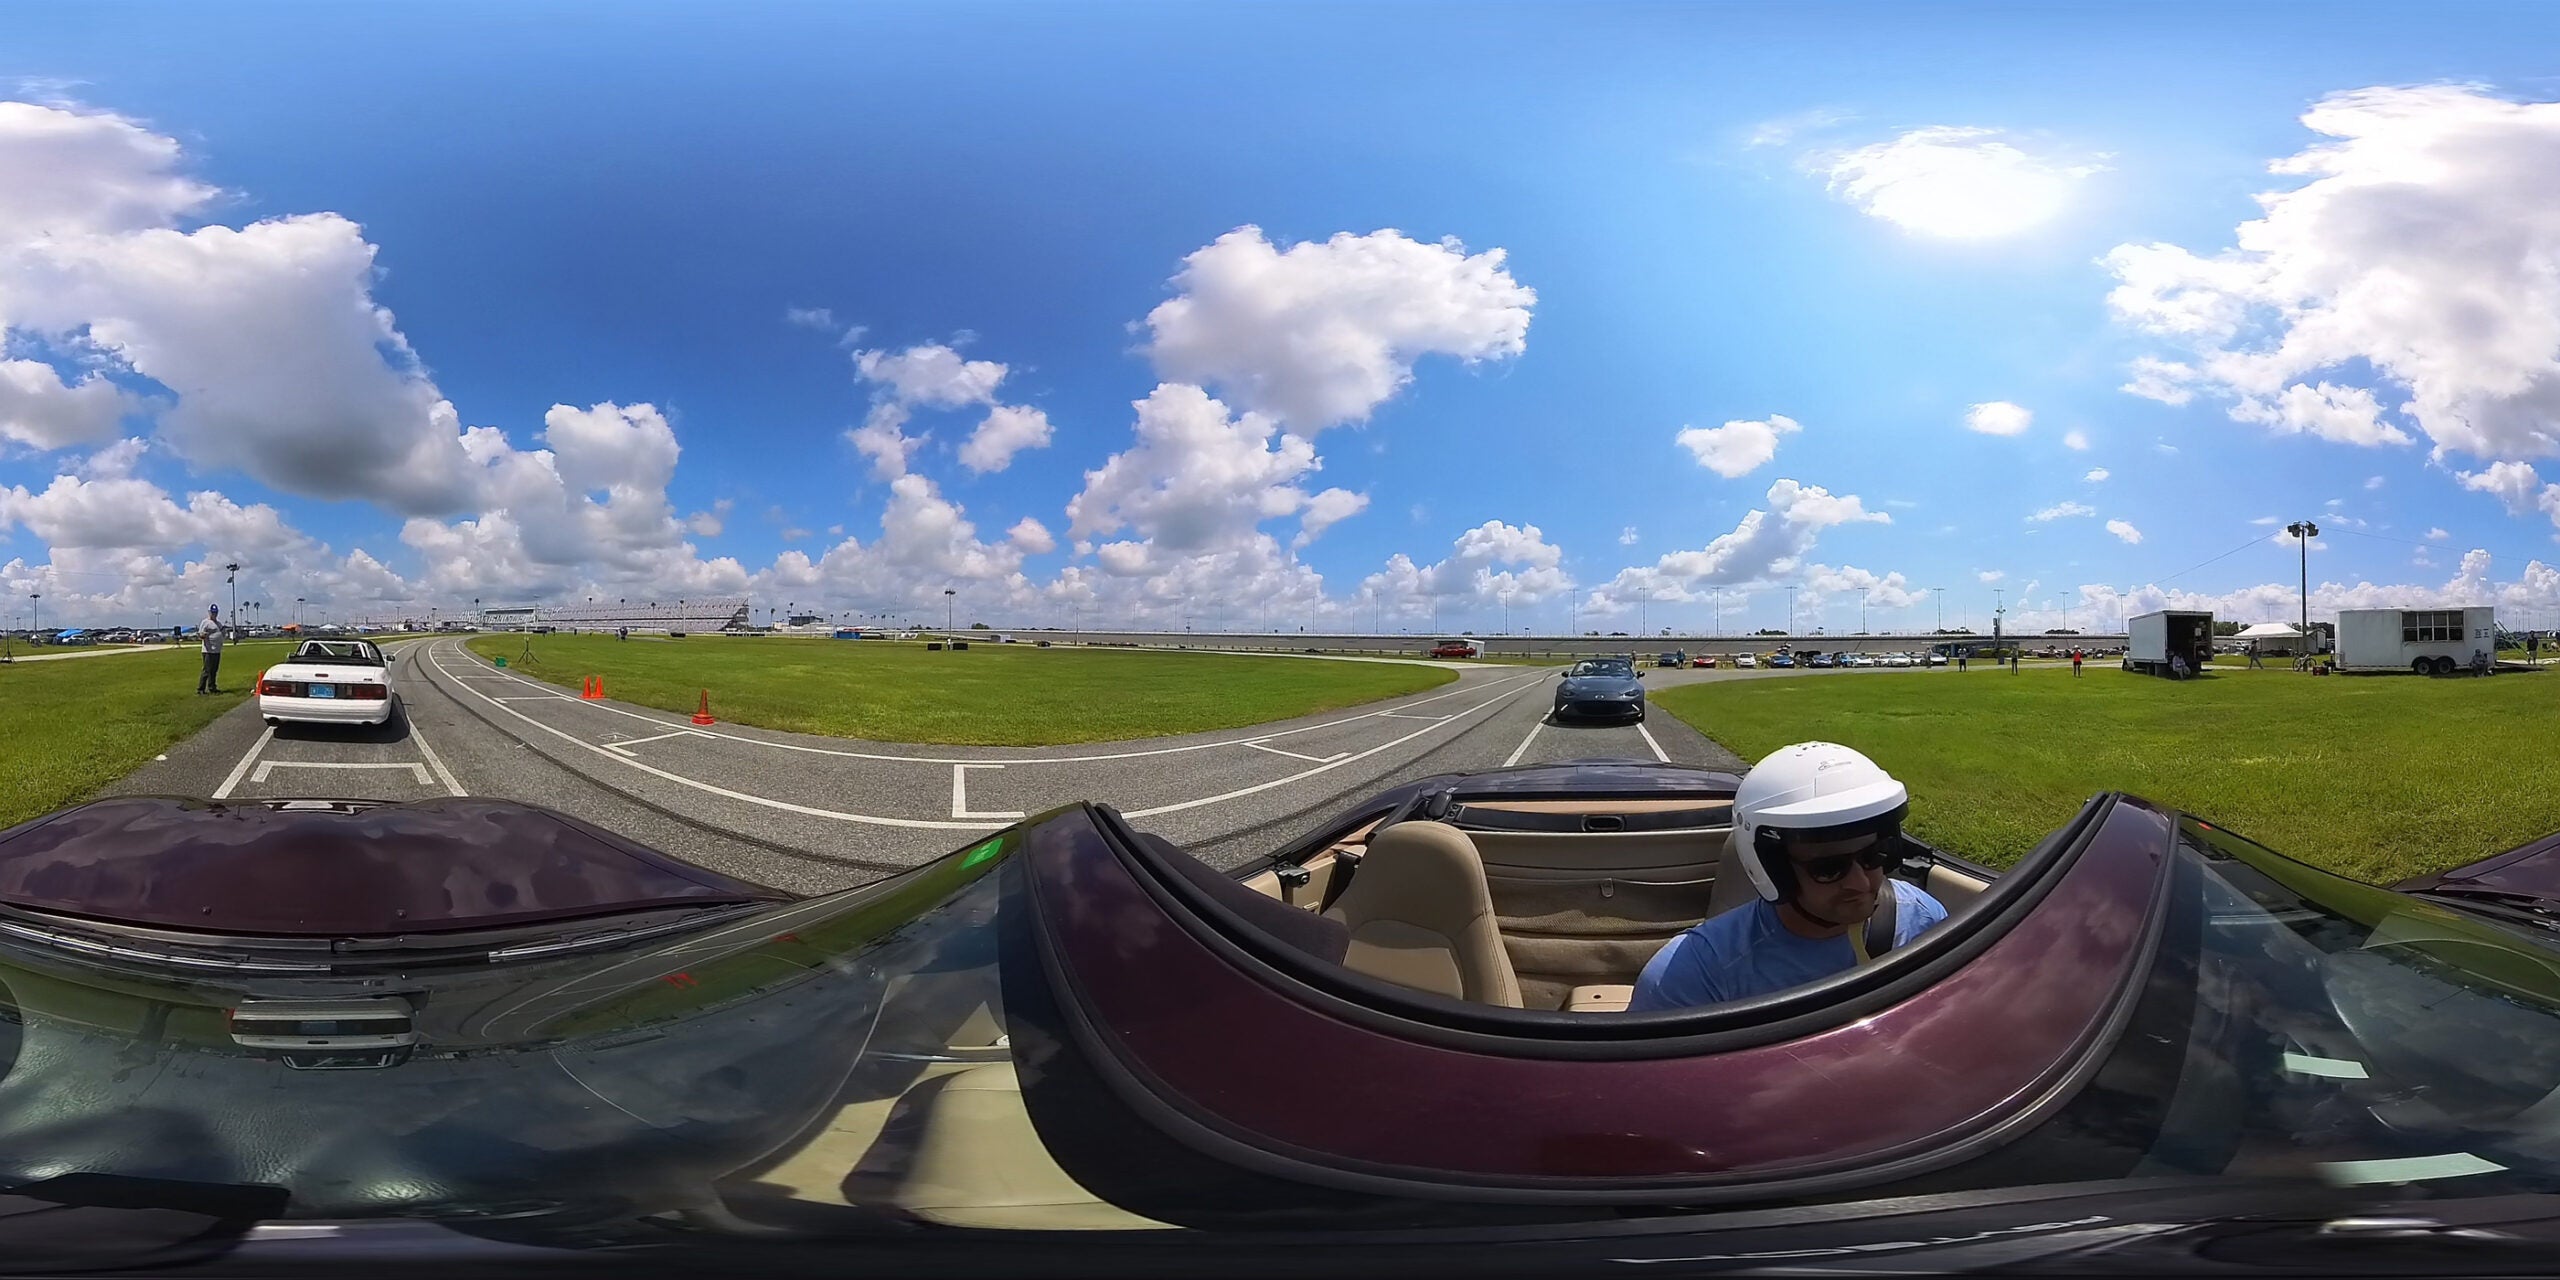 A screen grab of a 360 video showing a man in a Miata convertible at an autocross track.